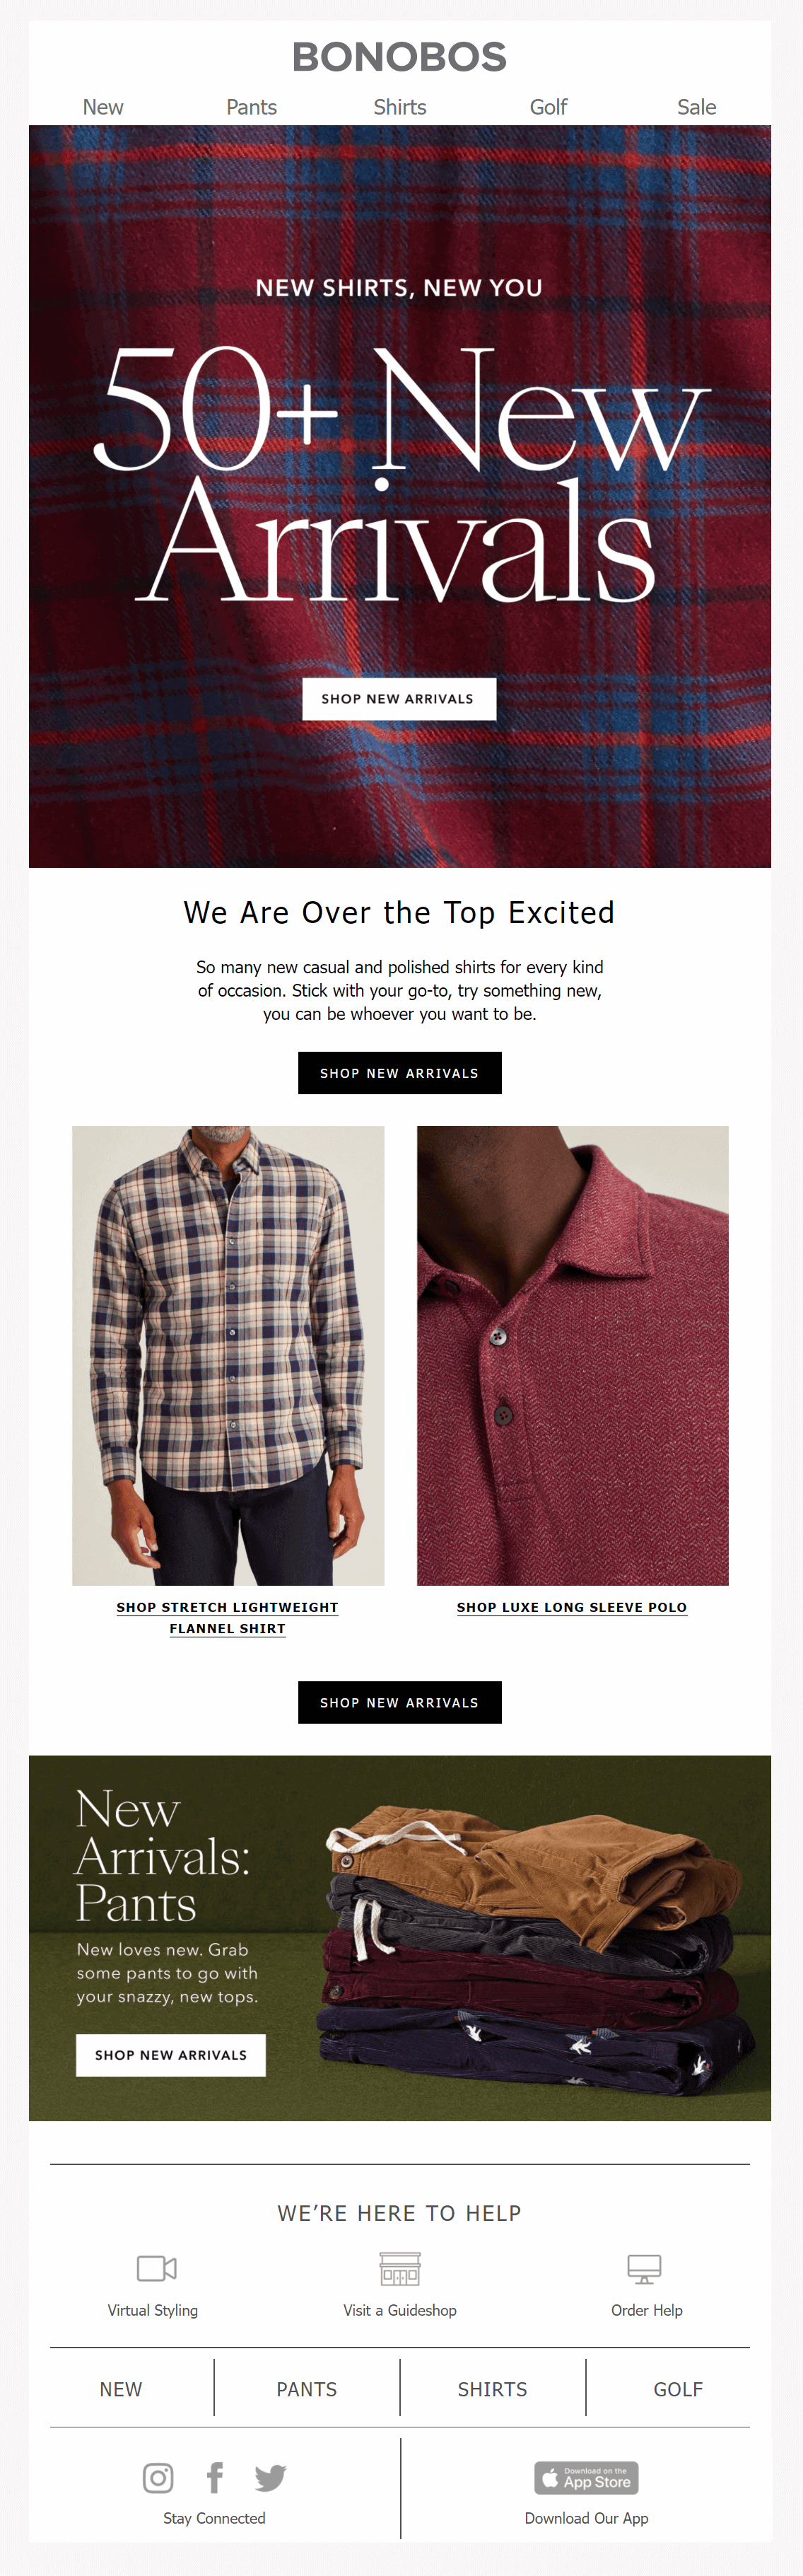 bonobos new product launch email